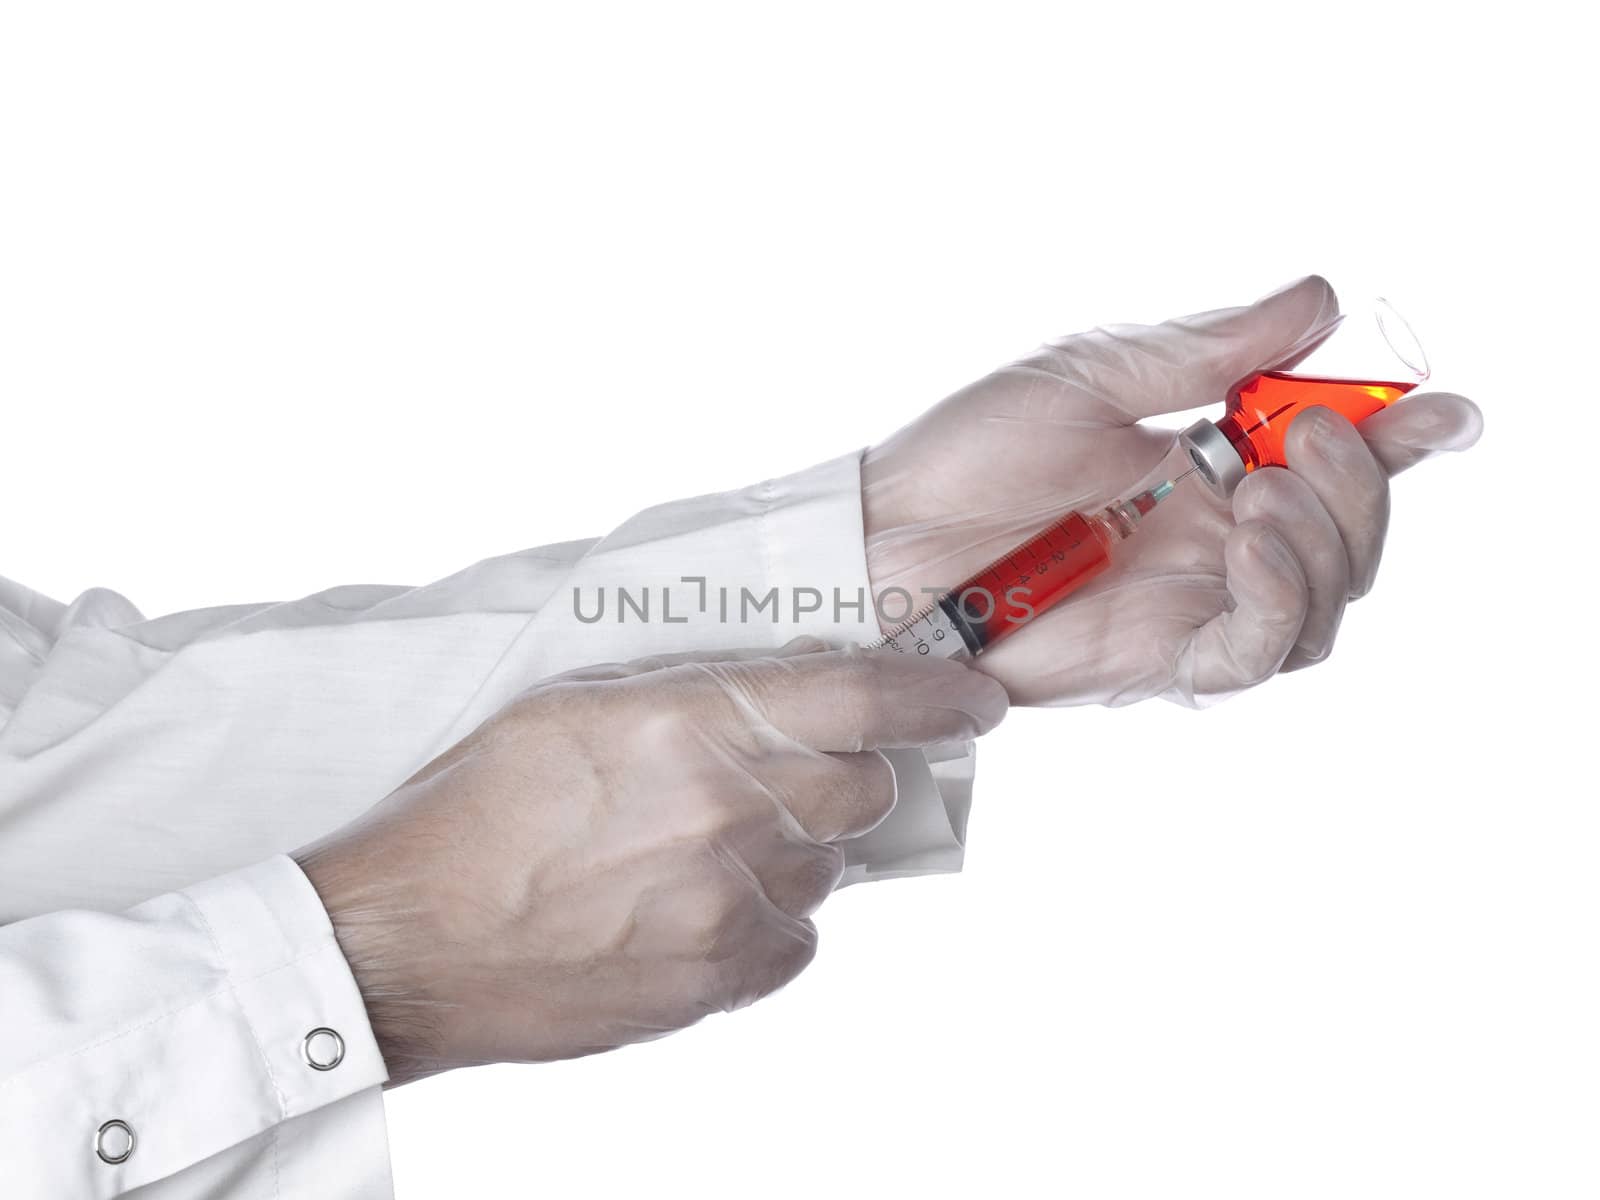 A doctor is taking a dose of a red medicine out of the vial.